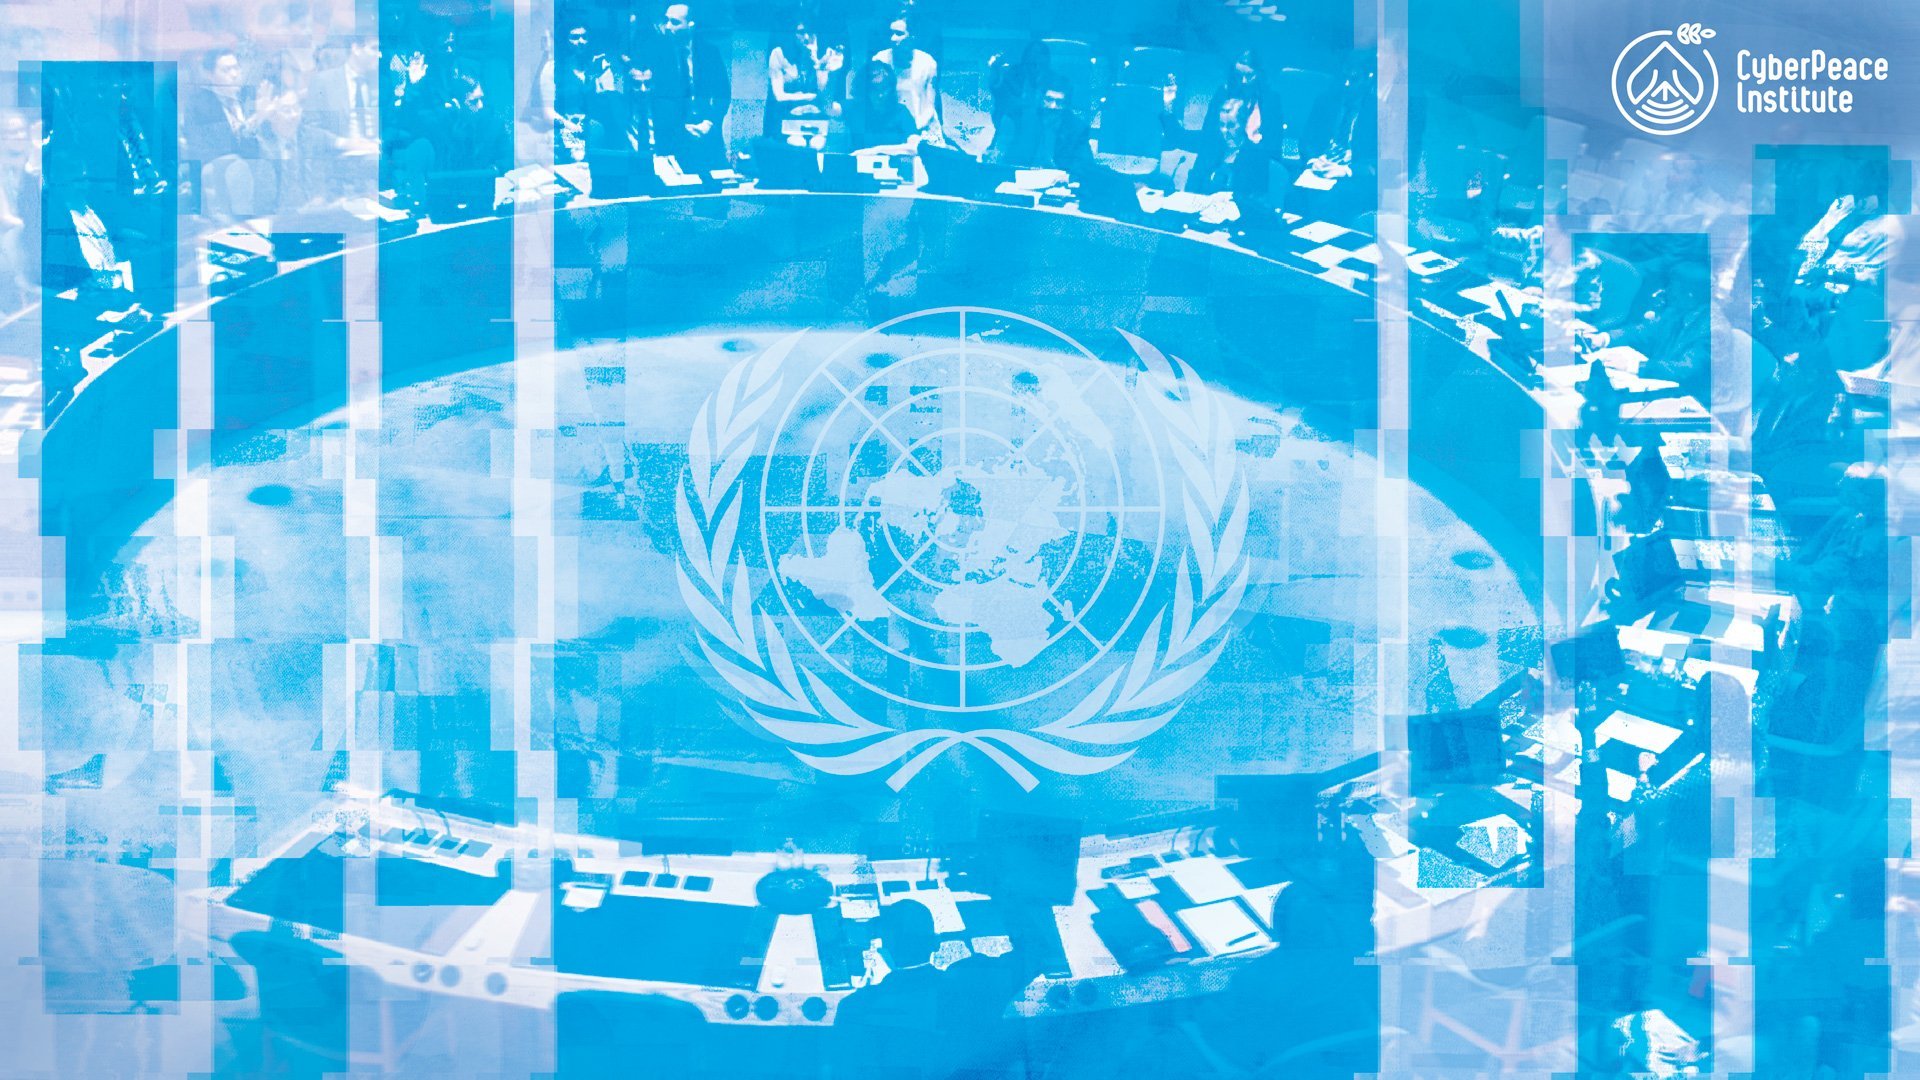 A year of United Nations cybercrime negotiations